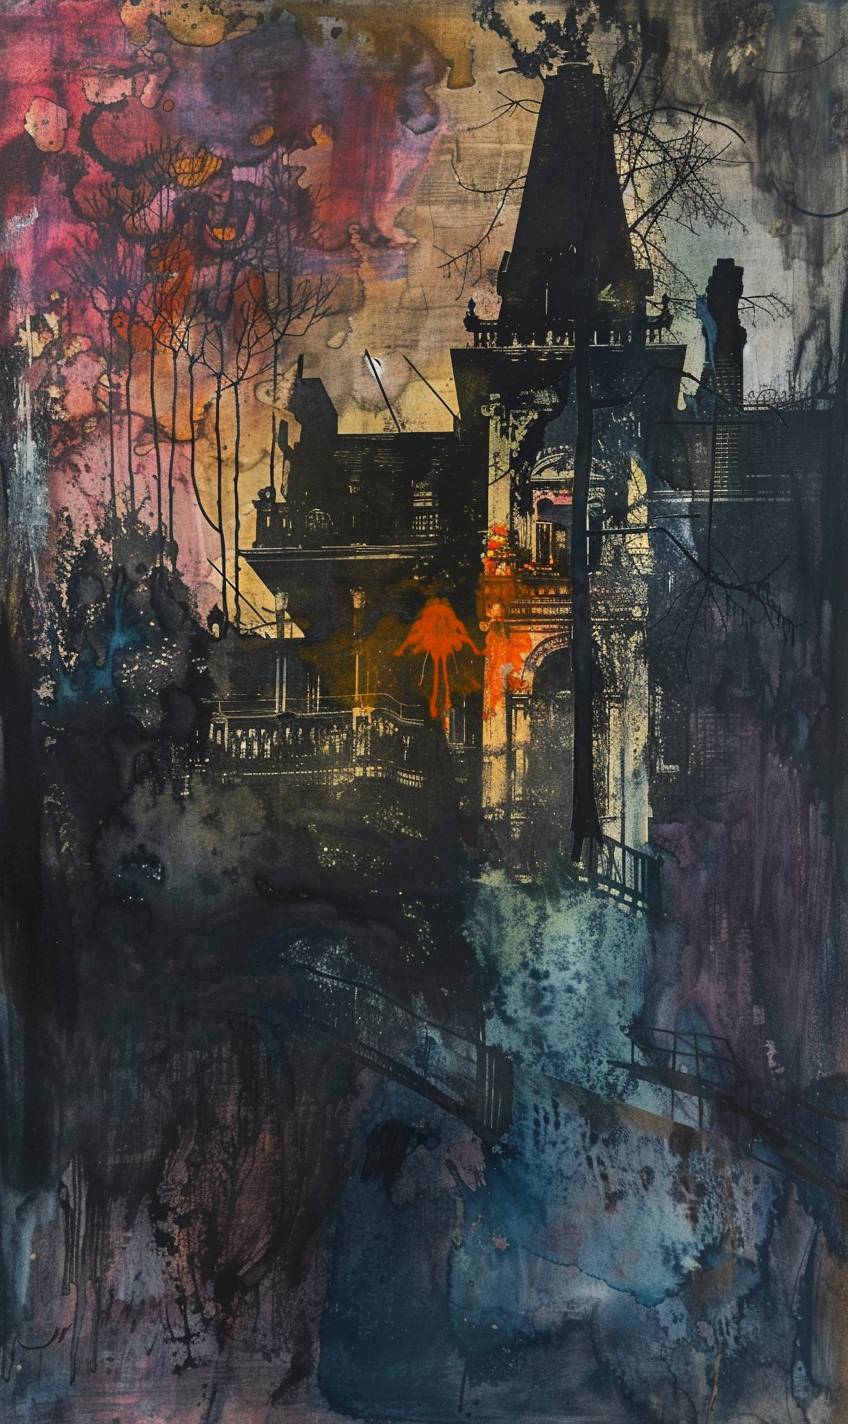 In style of Helen Frankenthaler, Haunted manor shrouded in mystery and darkness --ar 3:5  --v 6.0